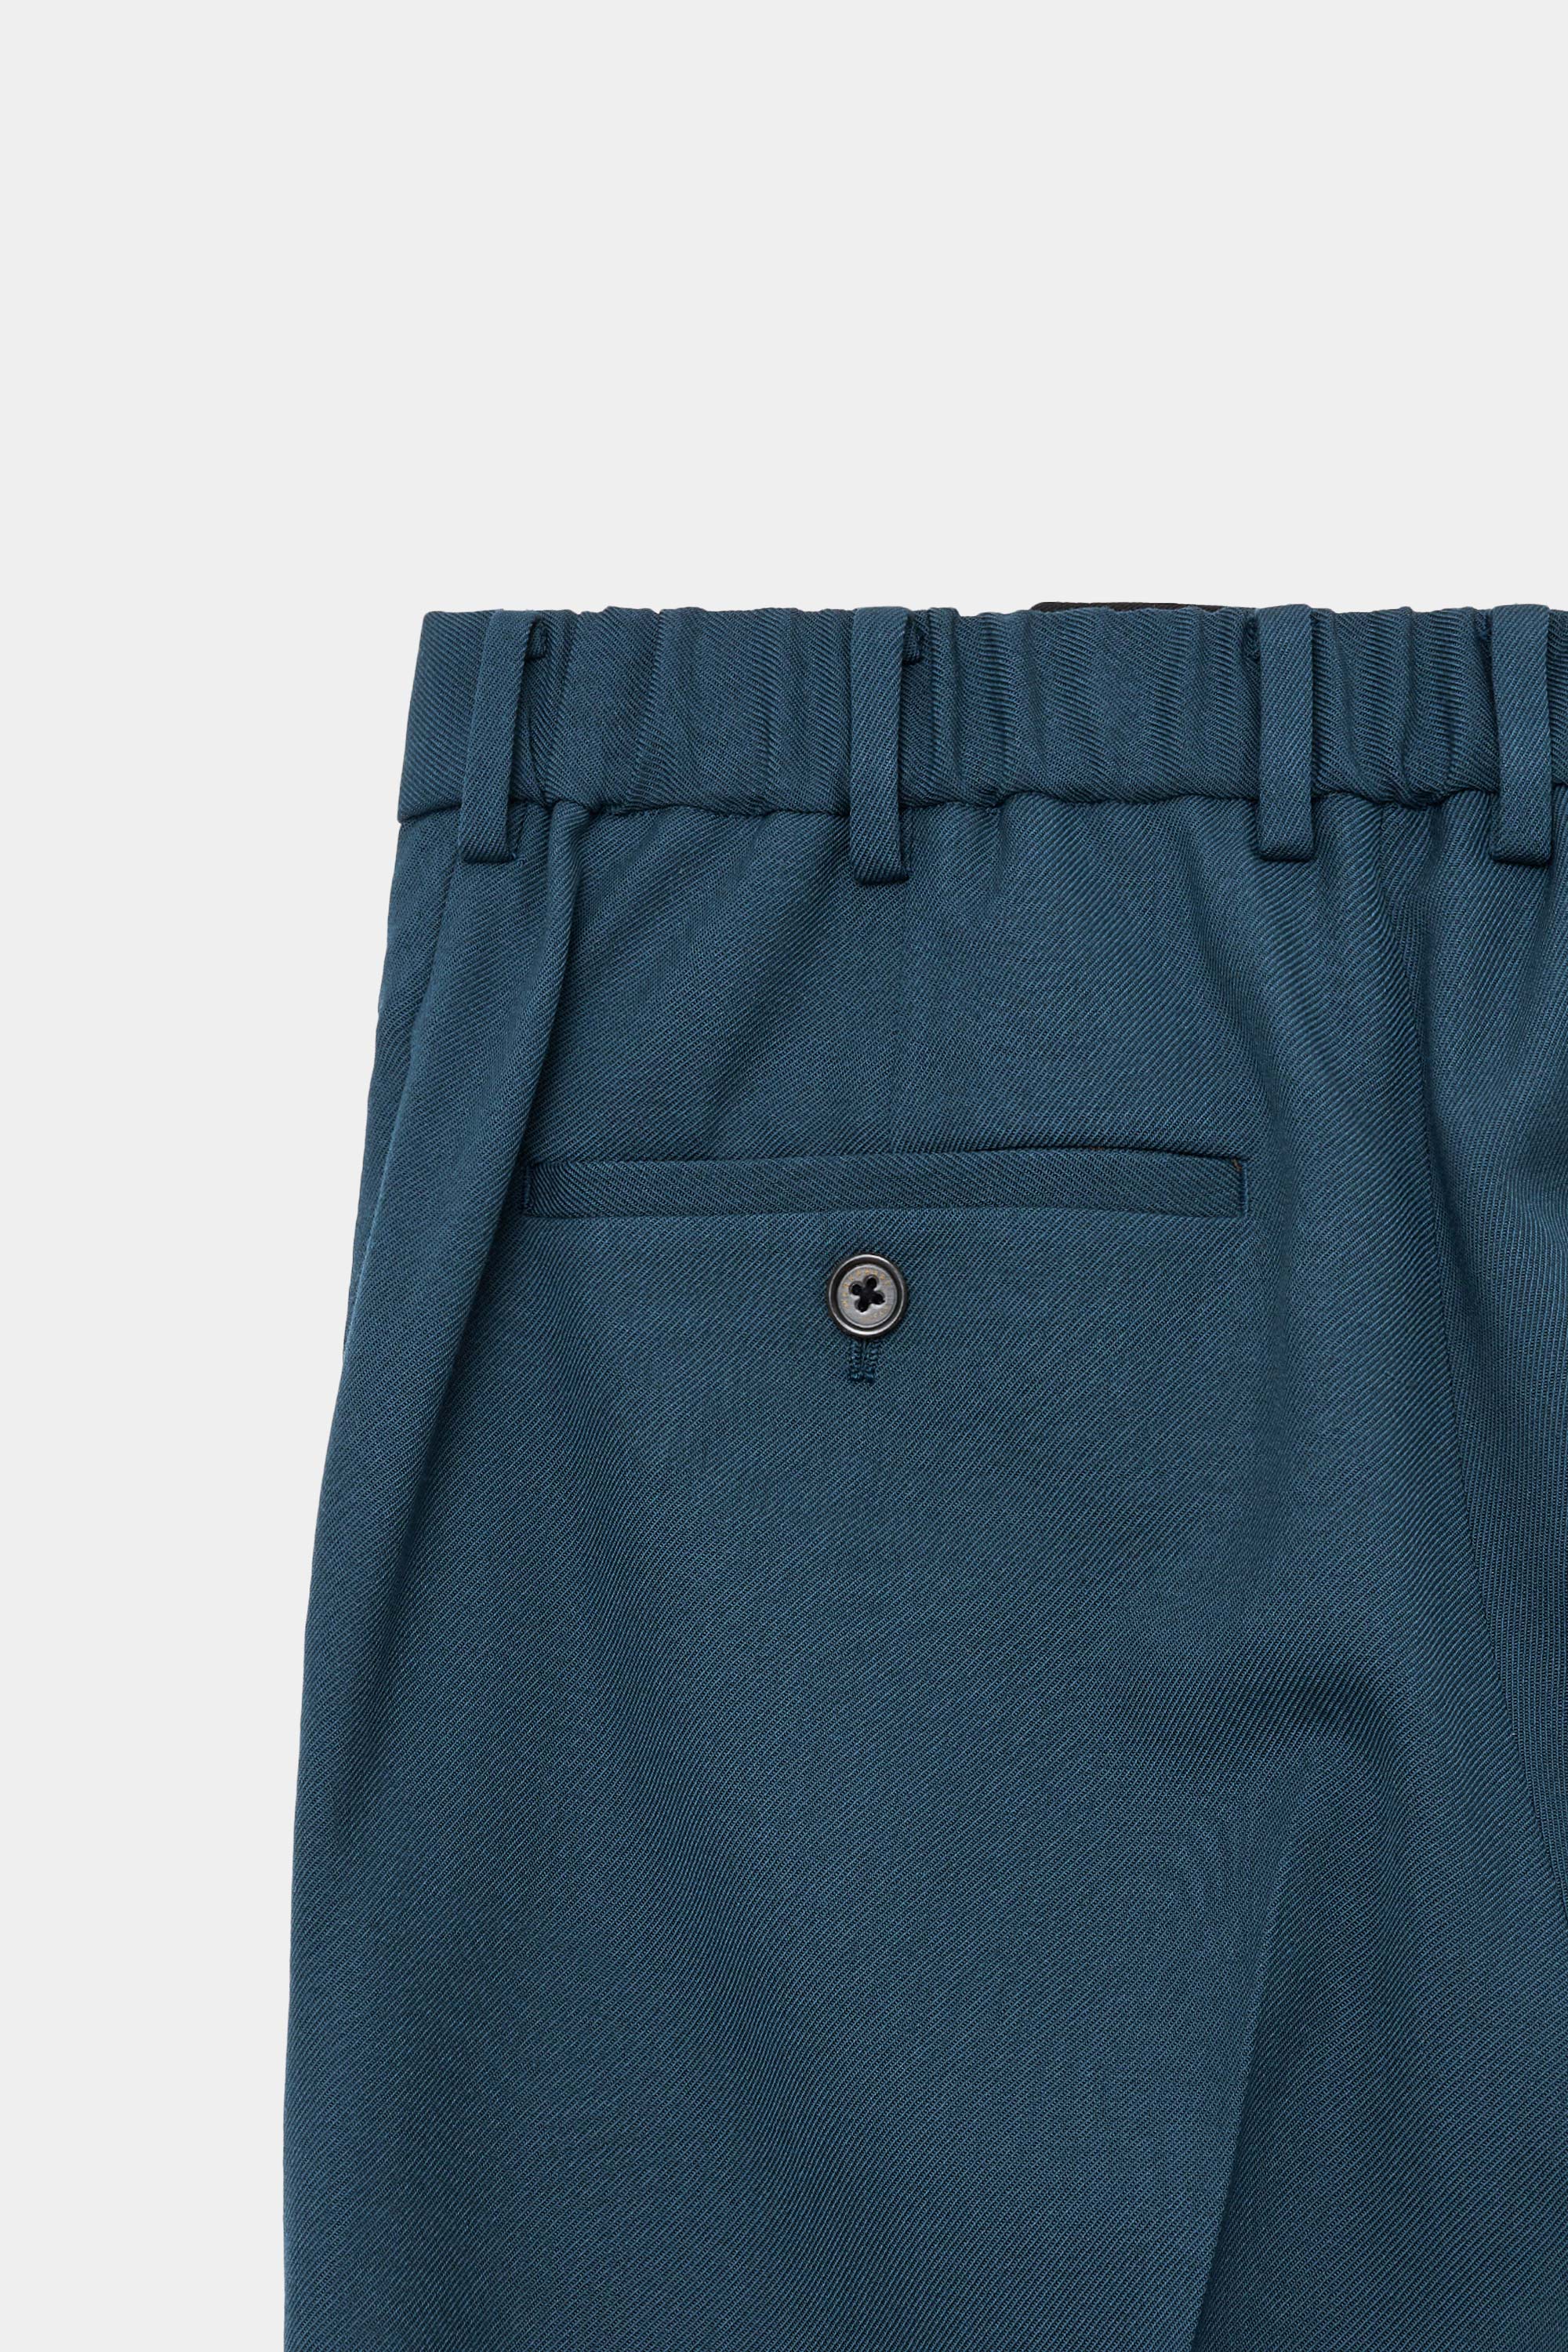 ORGANIC WOOL SURVIVAL CLOTH PEGTOP TROUSERS, Dark Turquoise